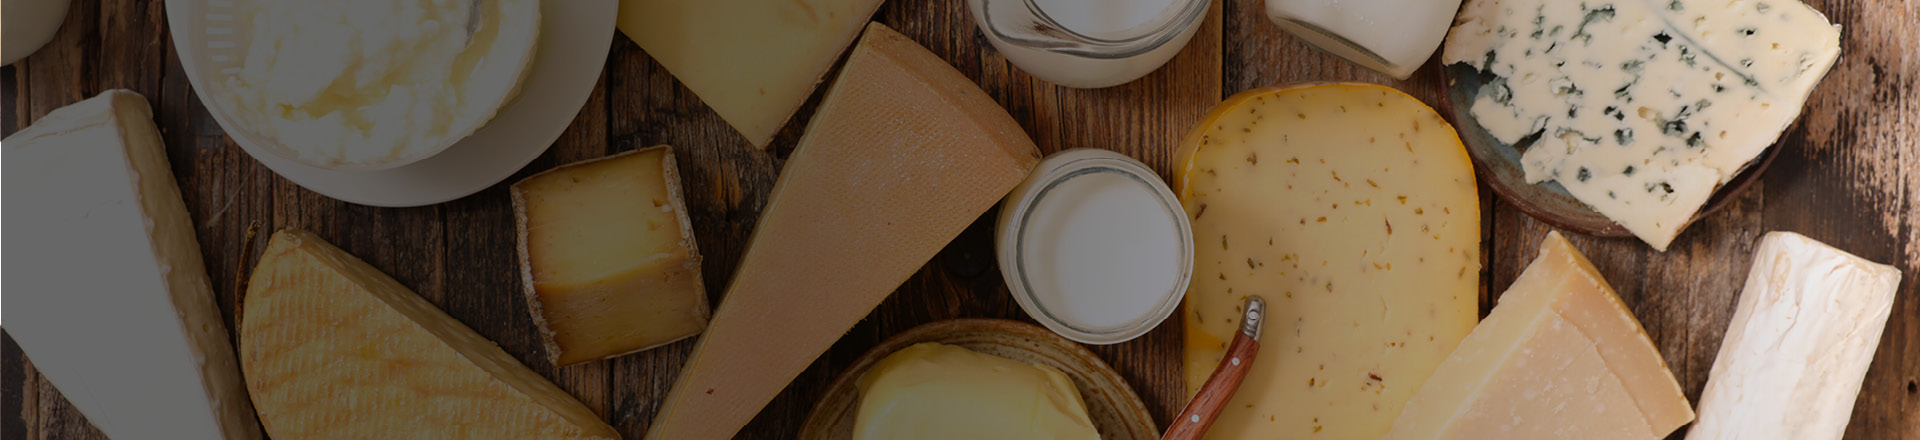 Slider_Landing-Page_MOSH-MOAH_dairy-products_1920x440